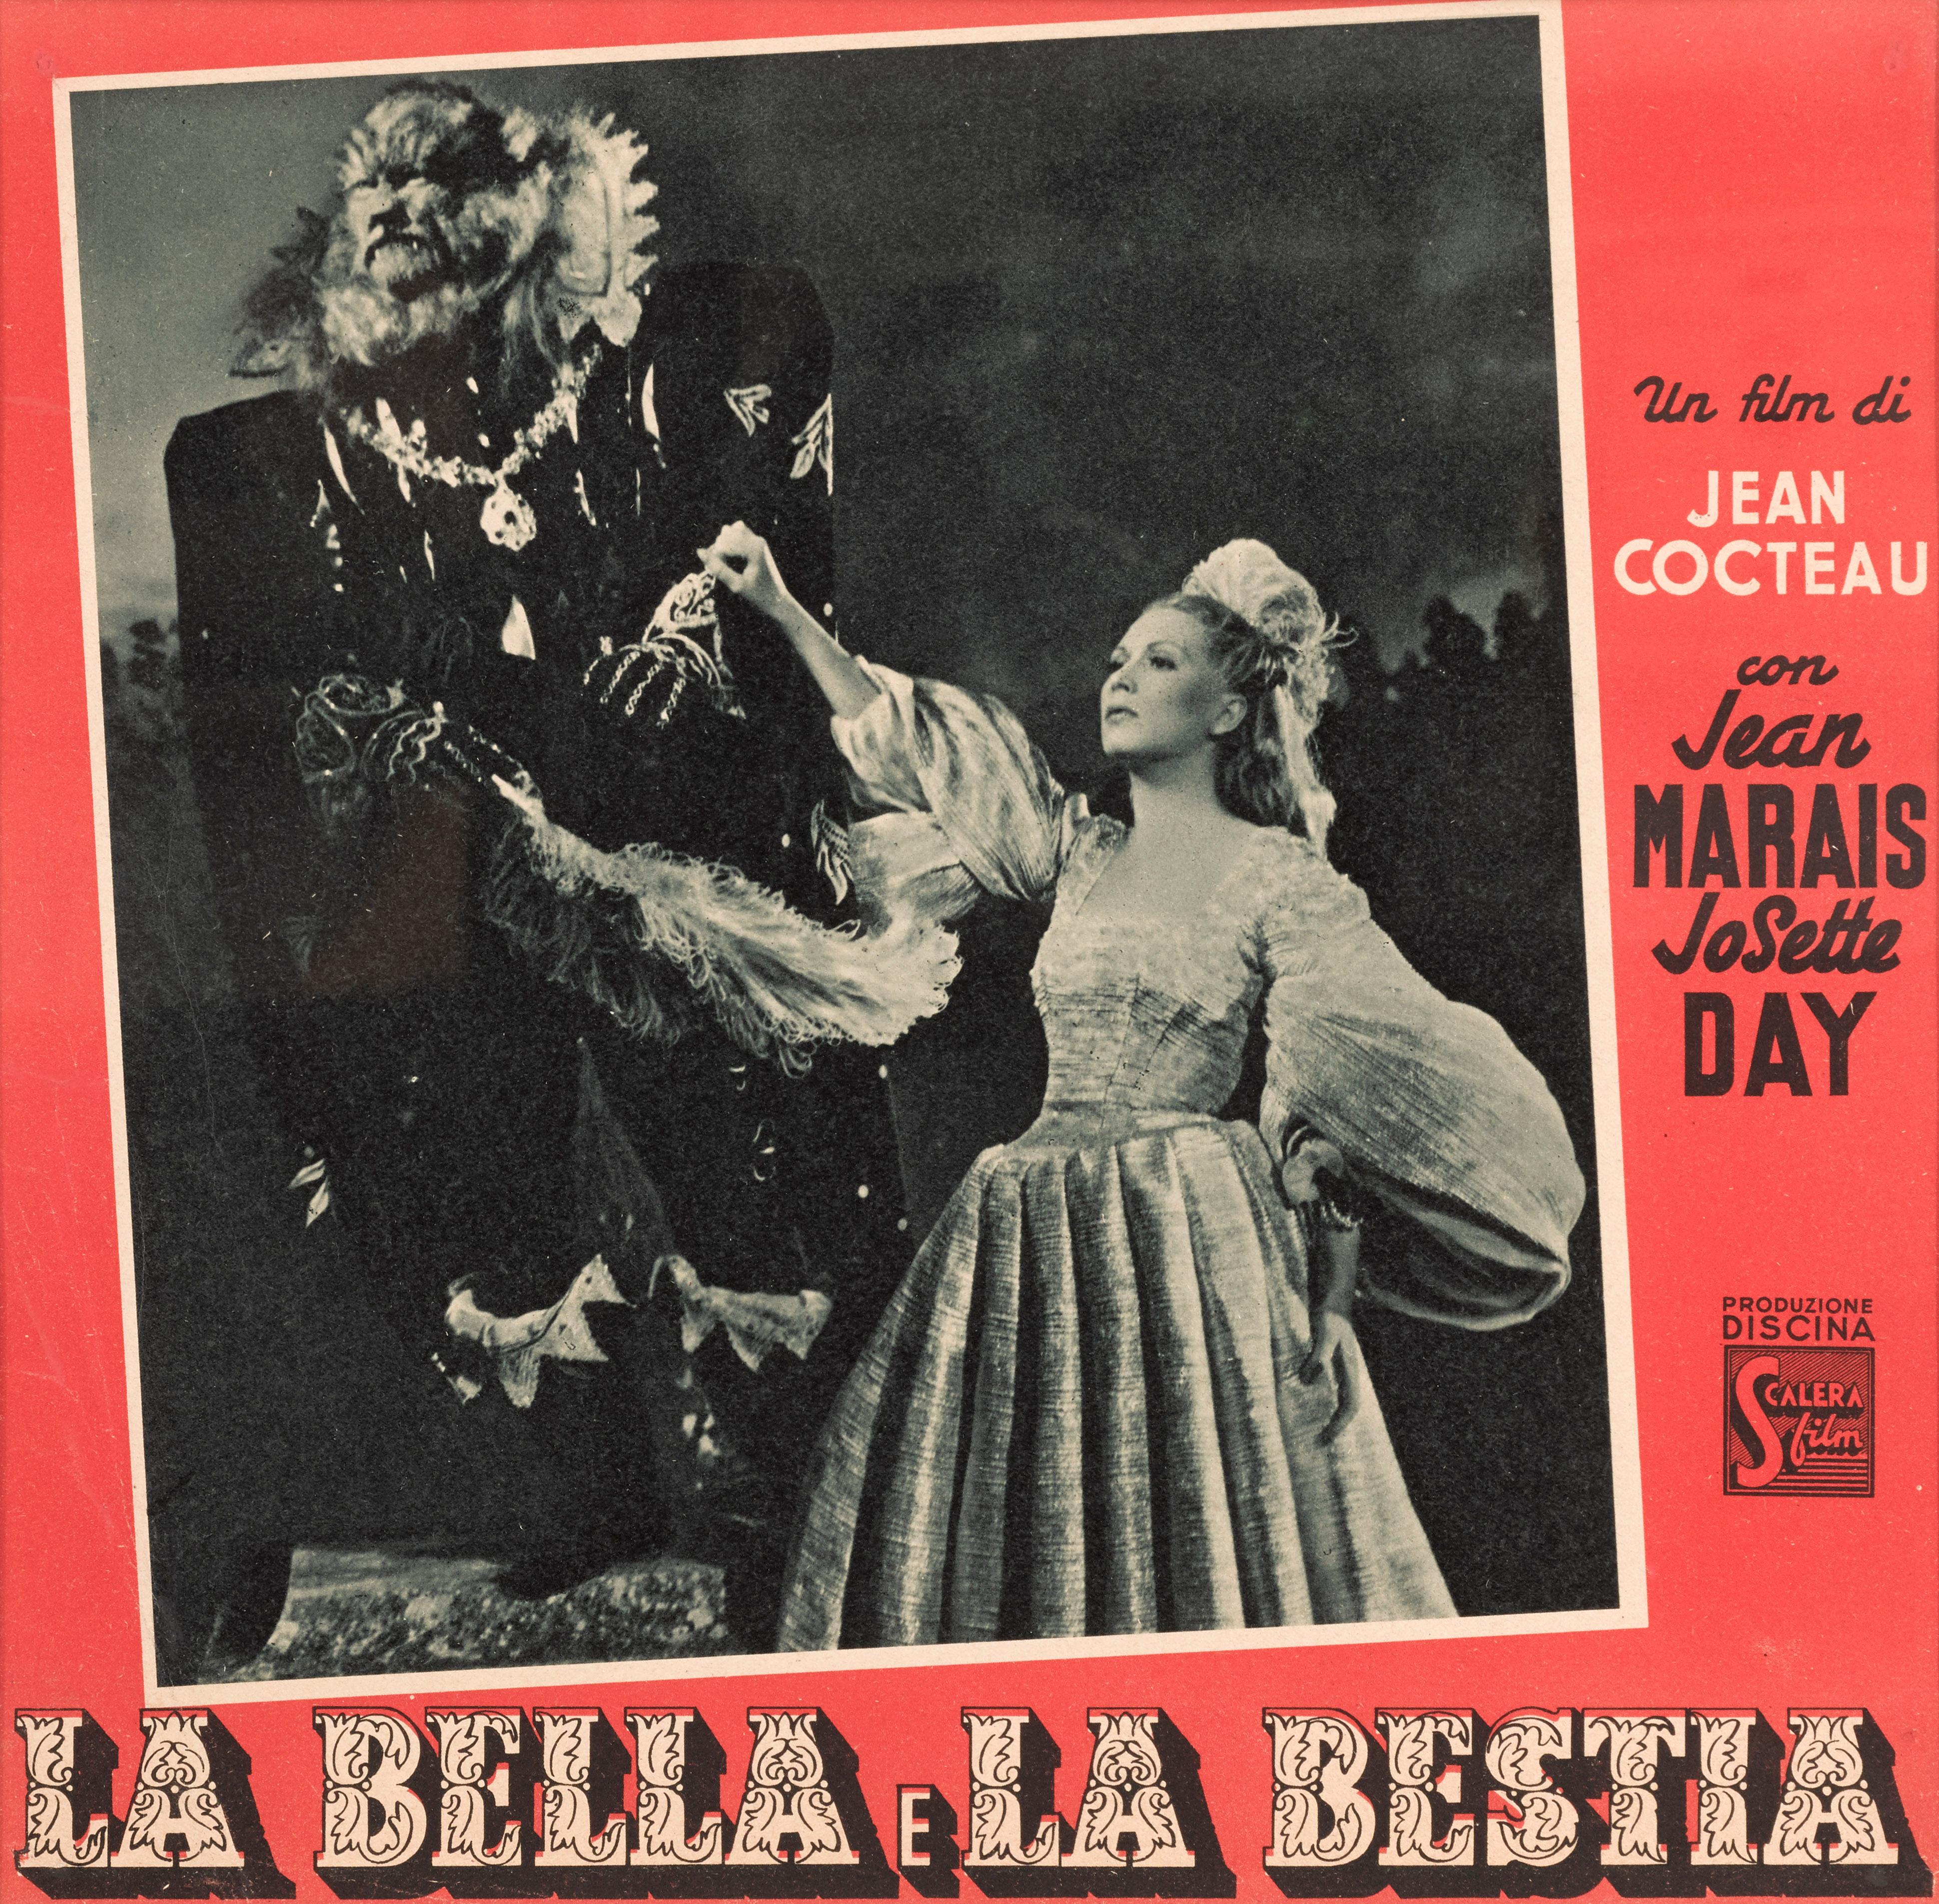 Original Italian lobby card from the Classic 1946 fantasy film.
The film had it's first Italian release one year later in 1947.
Gabrielle-Suzanne Barbot de Villeneuve's novel, La Belle et la Bête, was published in France in 1740. In 1946 Jean